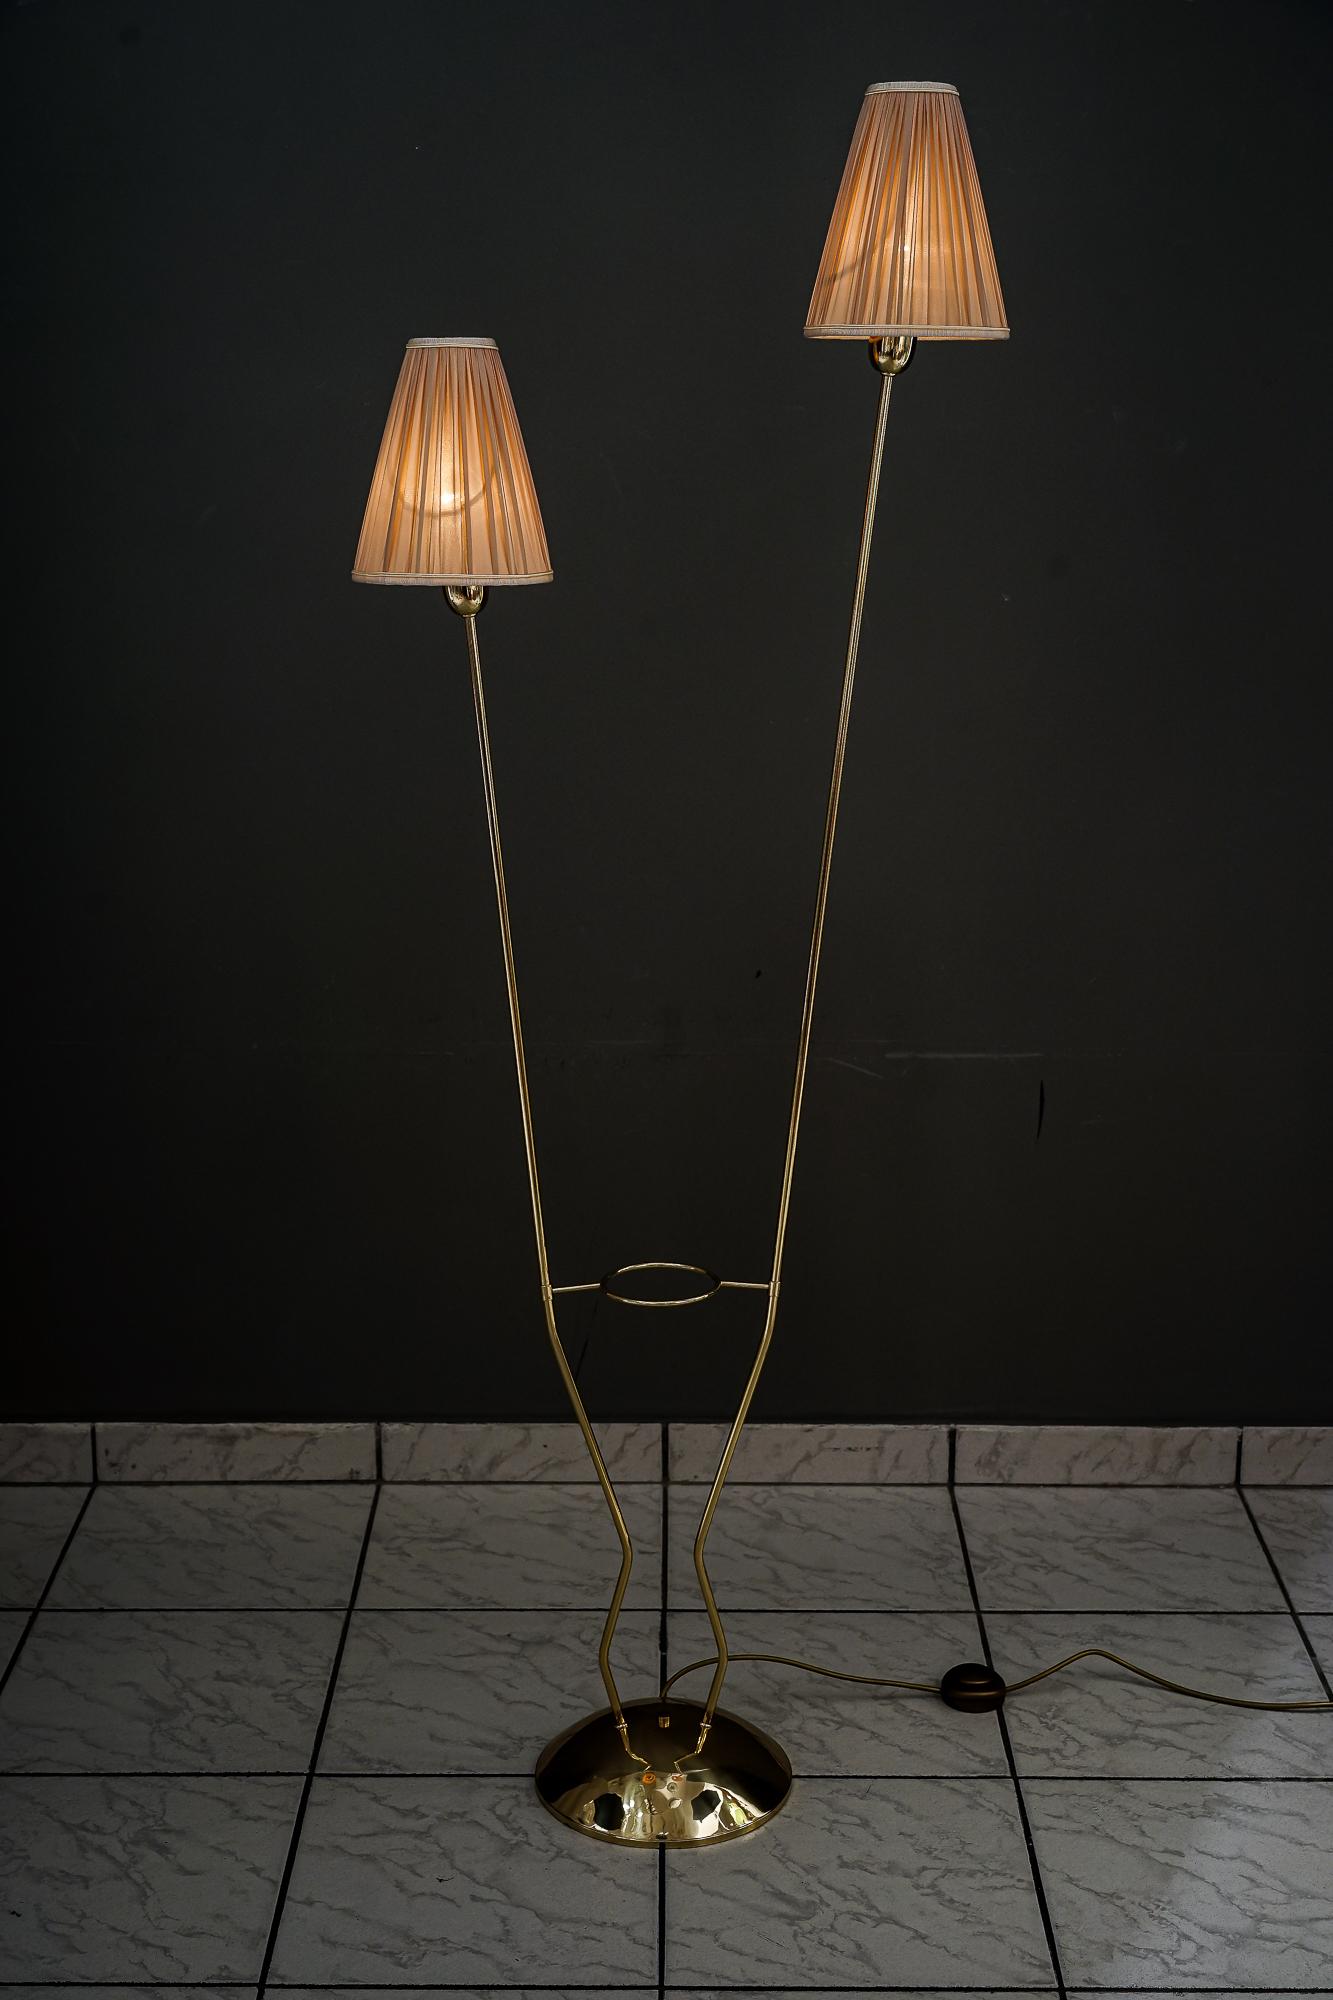 Rupert Nikoll floor lamp with fabric shades, Vienna, around 1950s.
Polished and stove enameled.
The fabric shades are replaced (new).